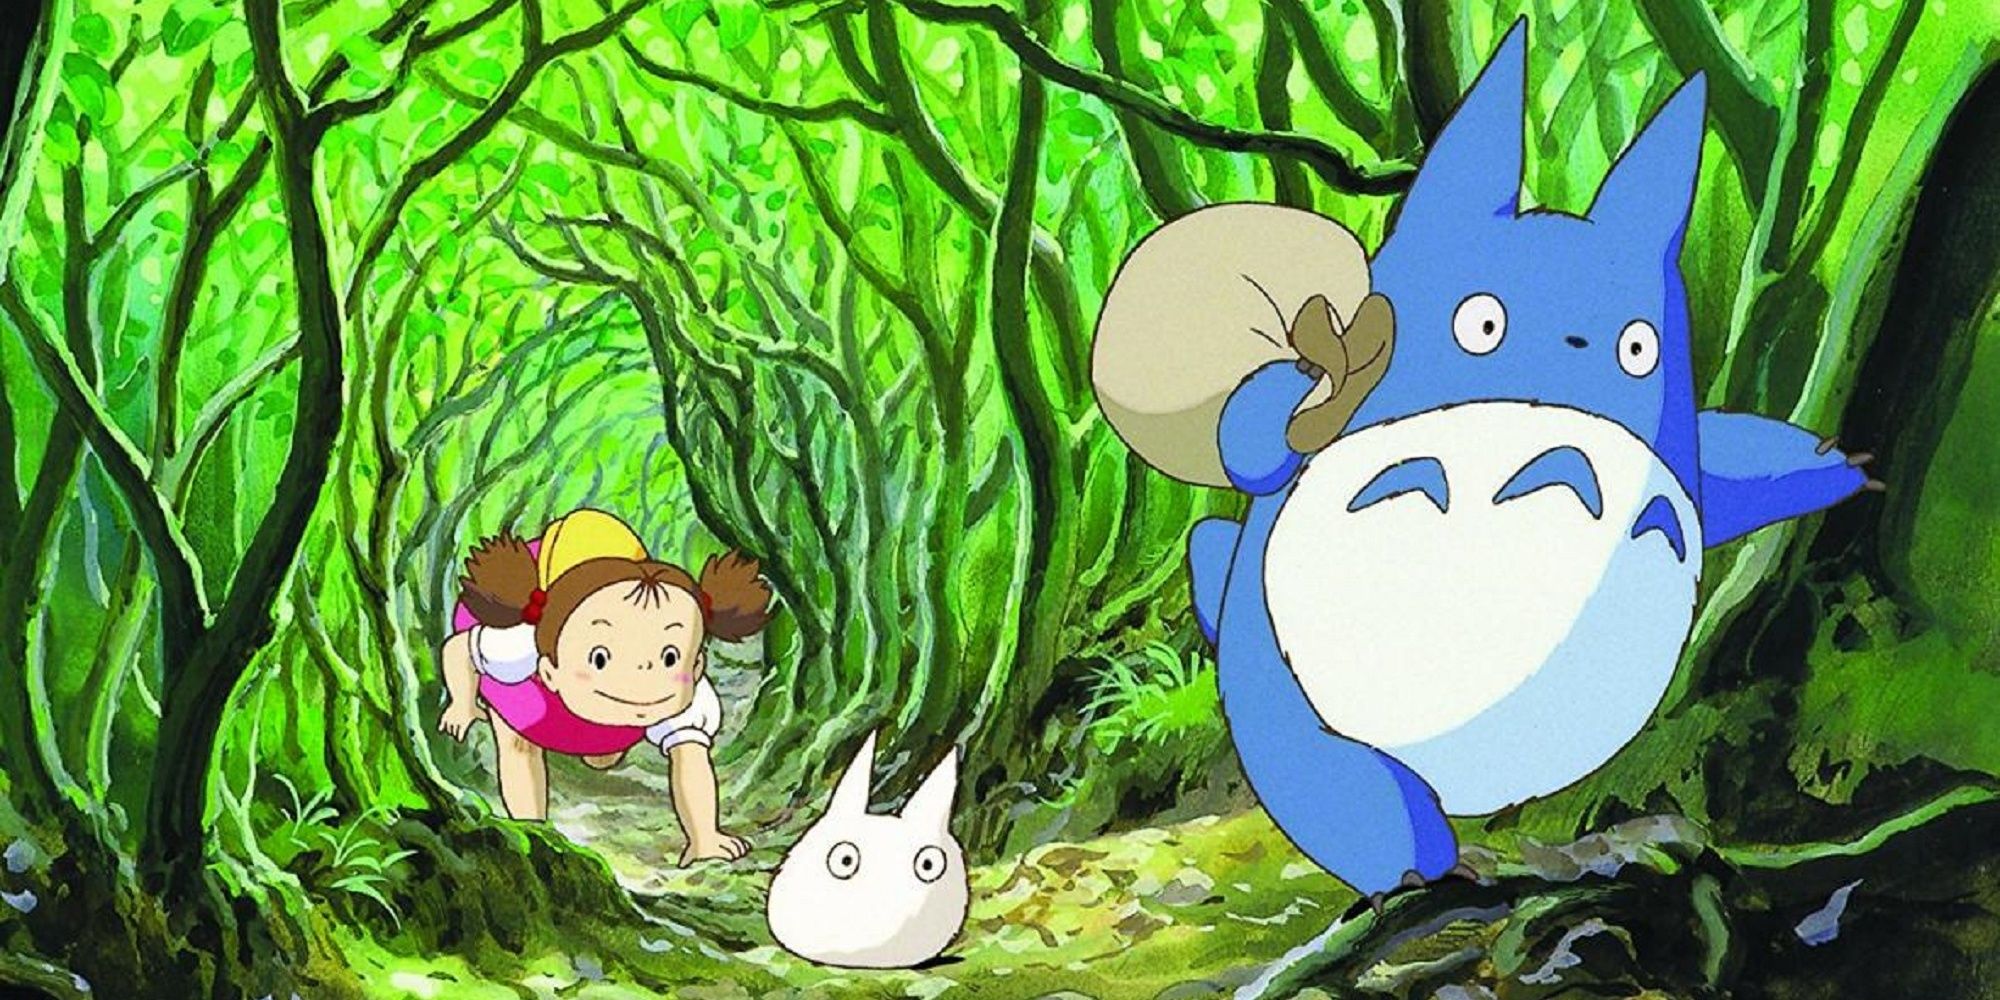 My Neighbor Totoro Japan S Campaign To Protect Forest That Inspired Film